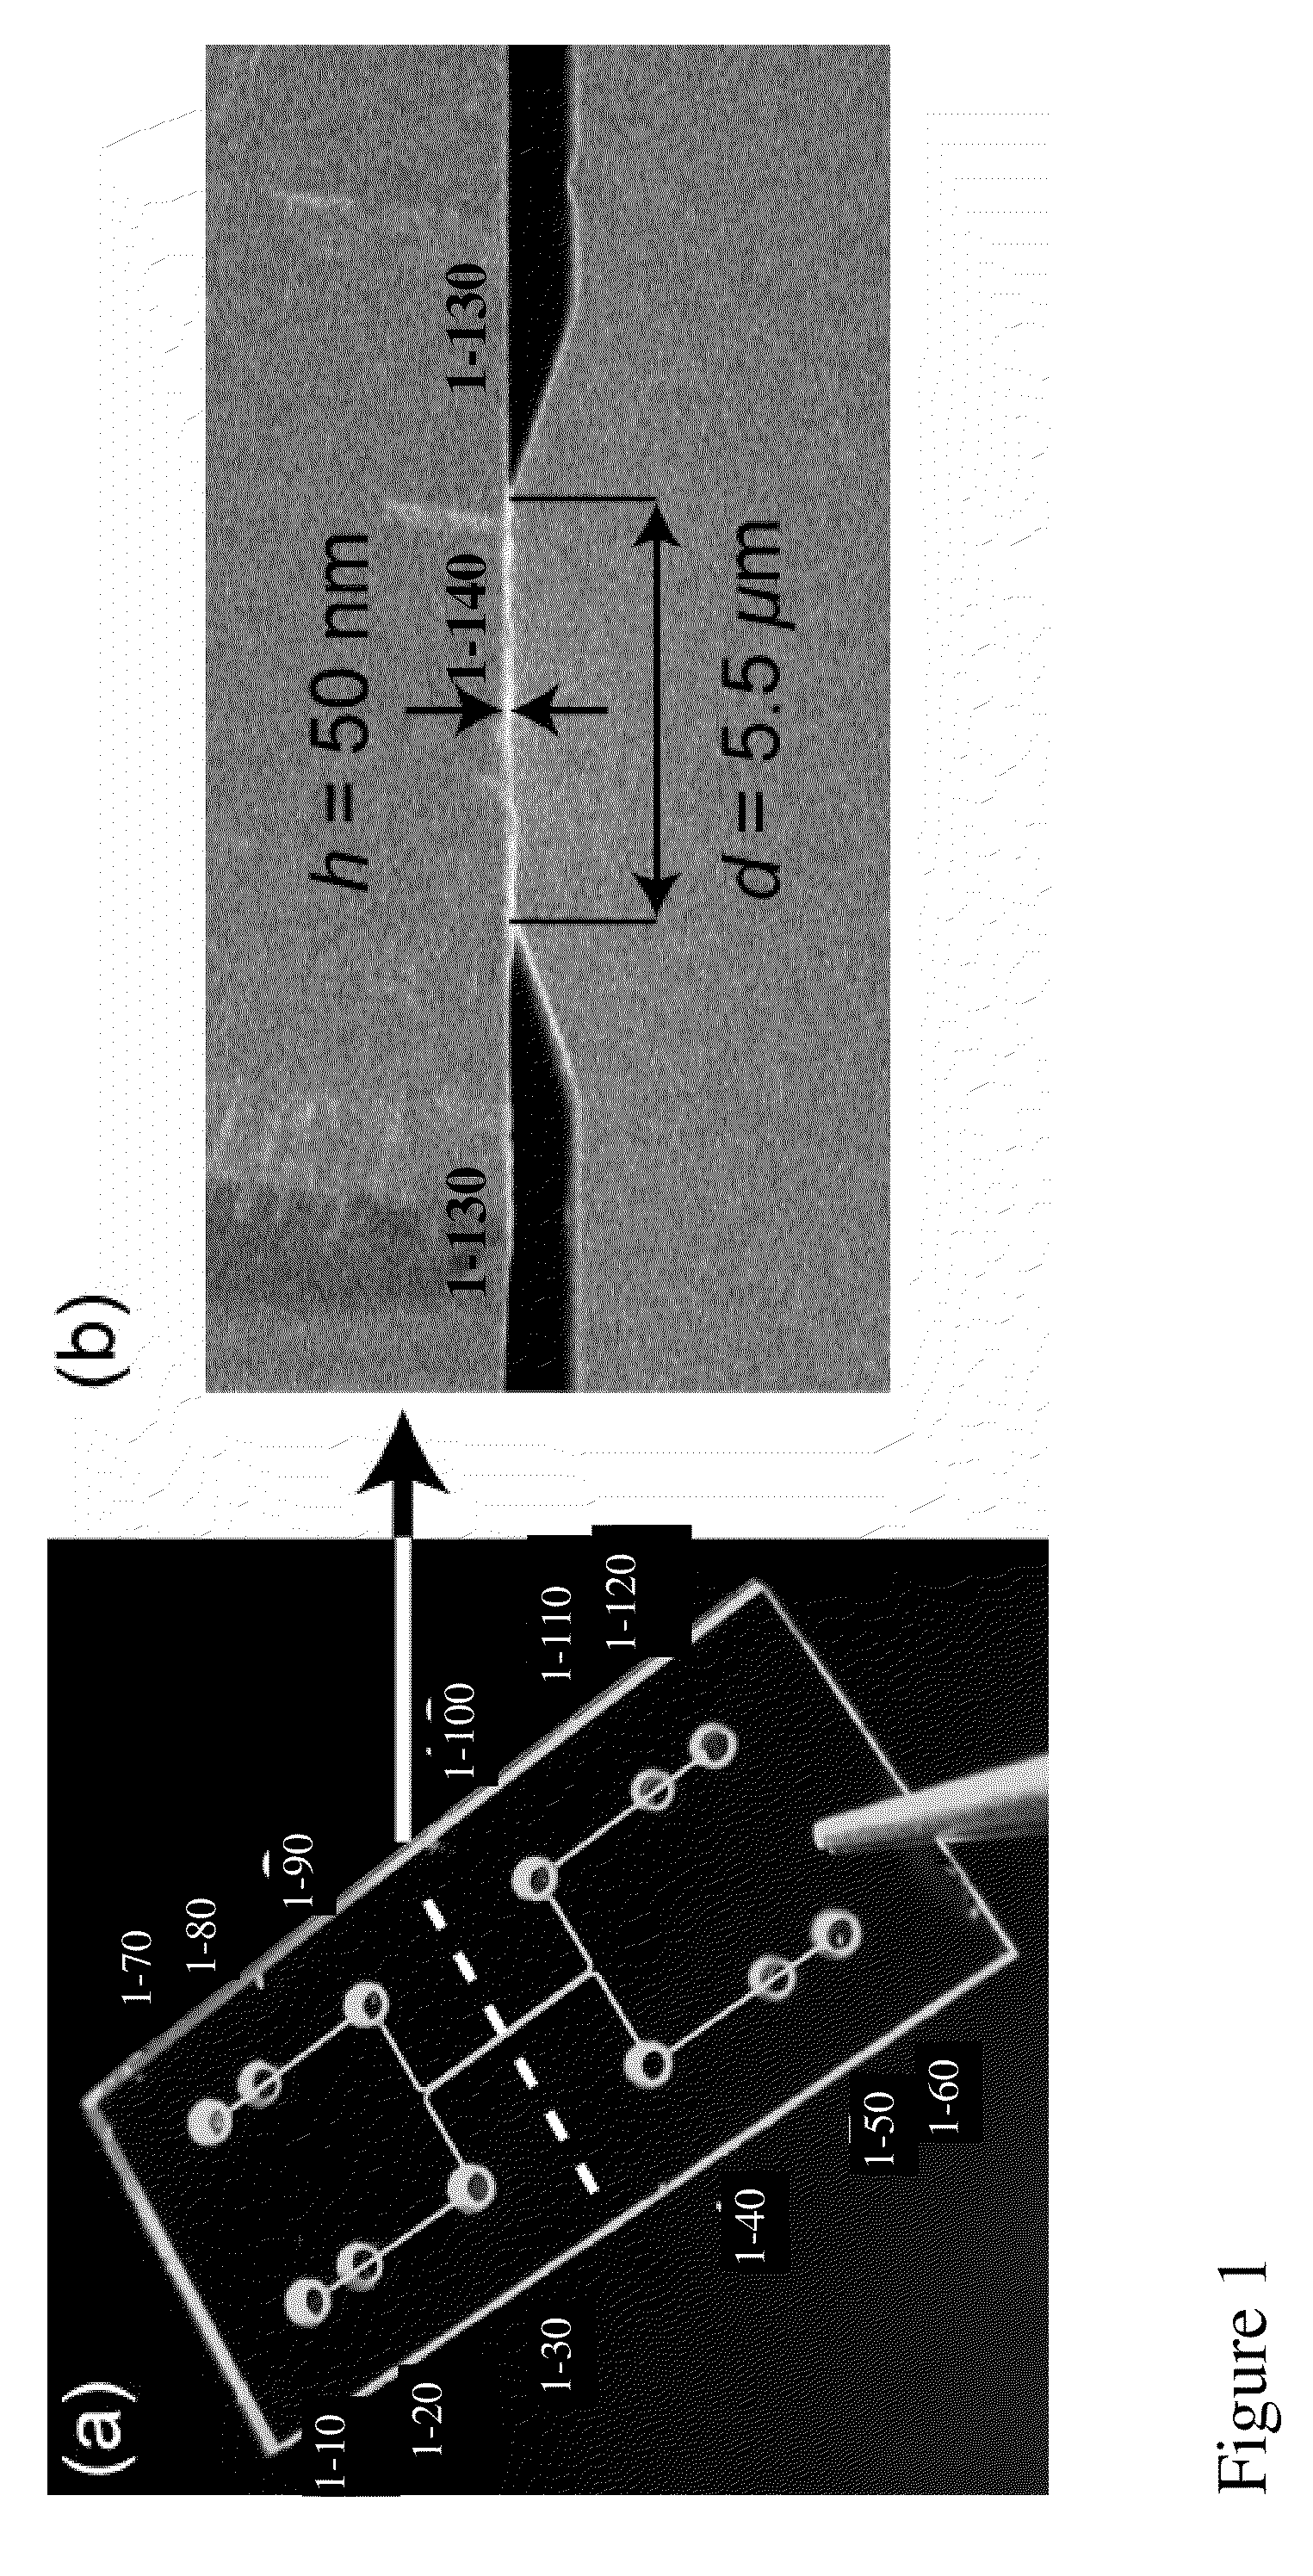 Nanoconfinement- based devices and methods of use thereof